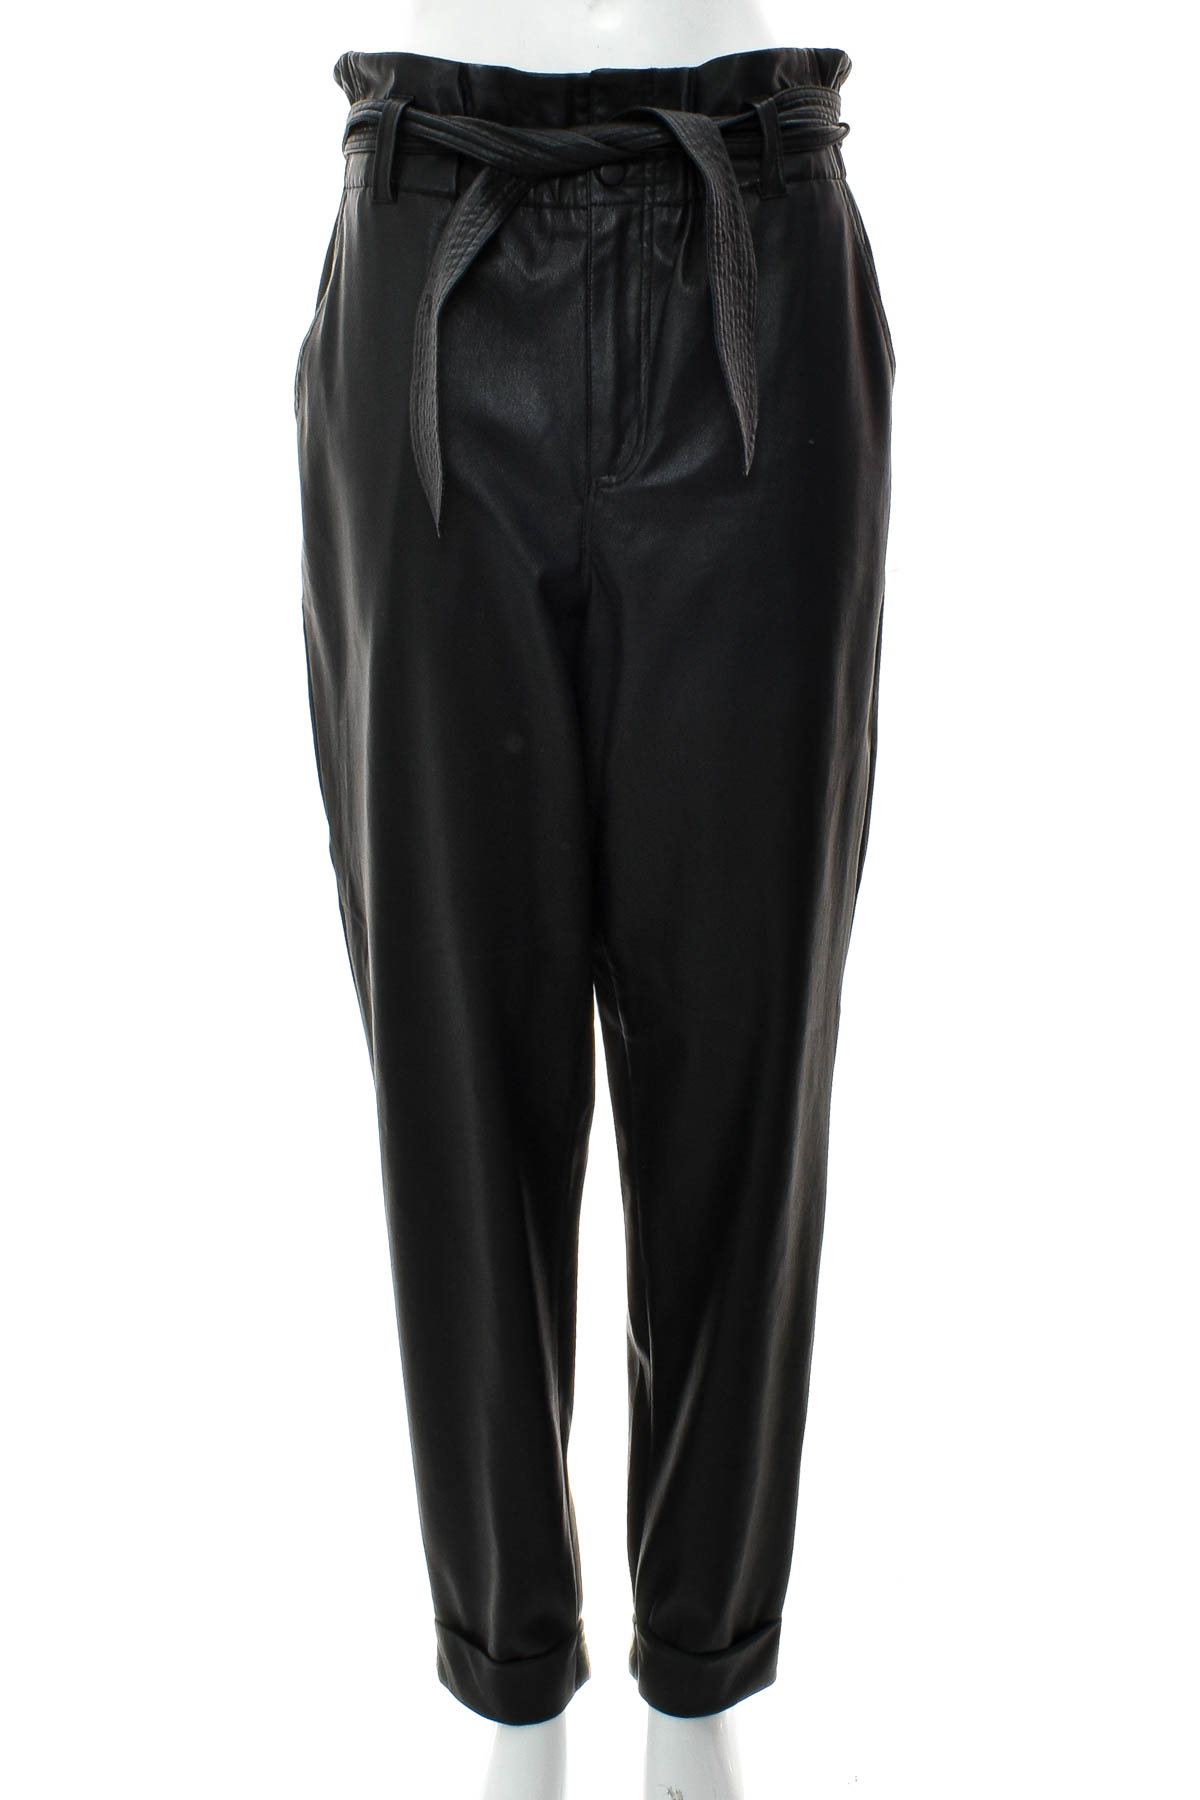 Women's leather trousers - Mbym - 0